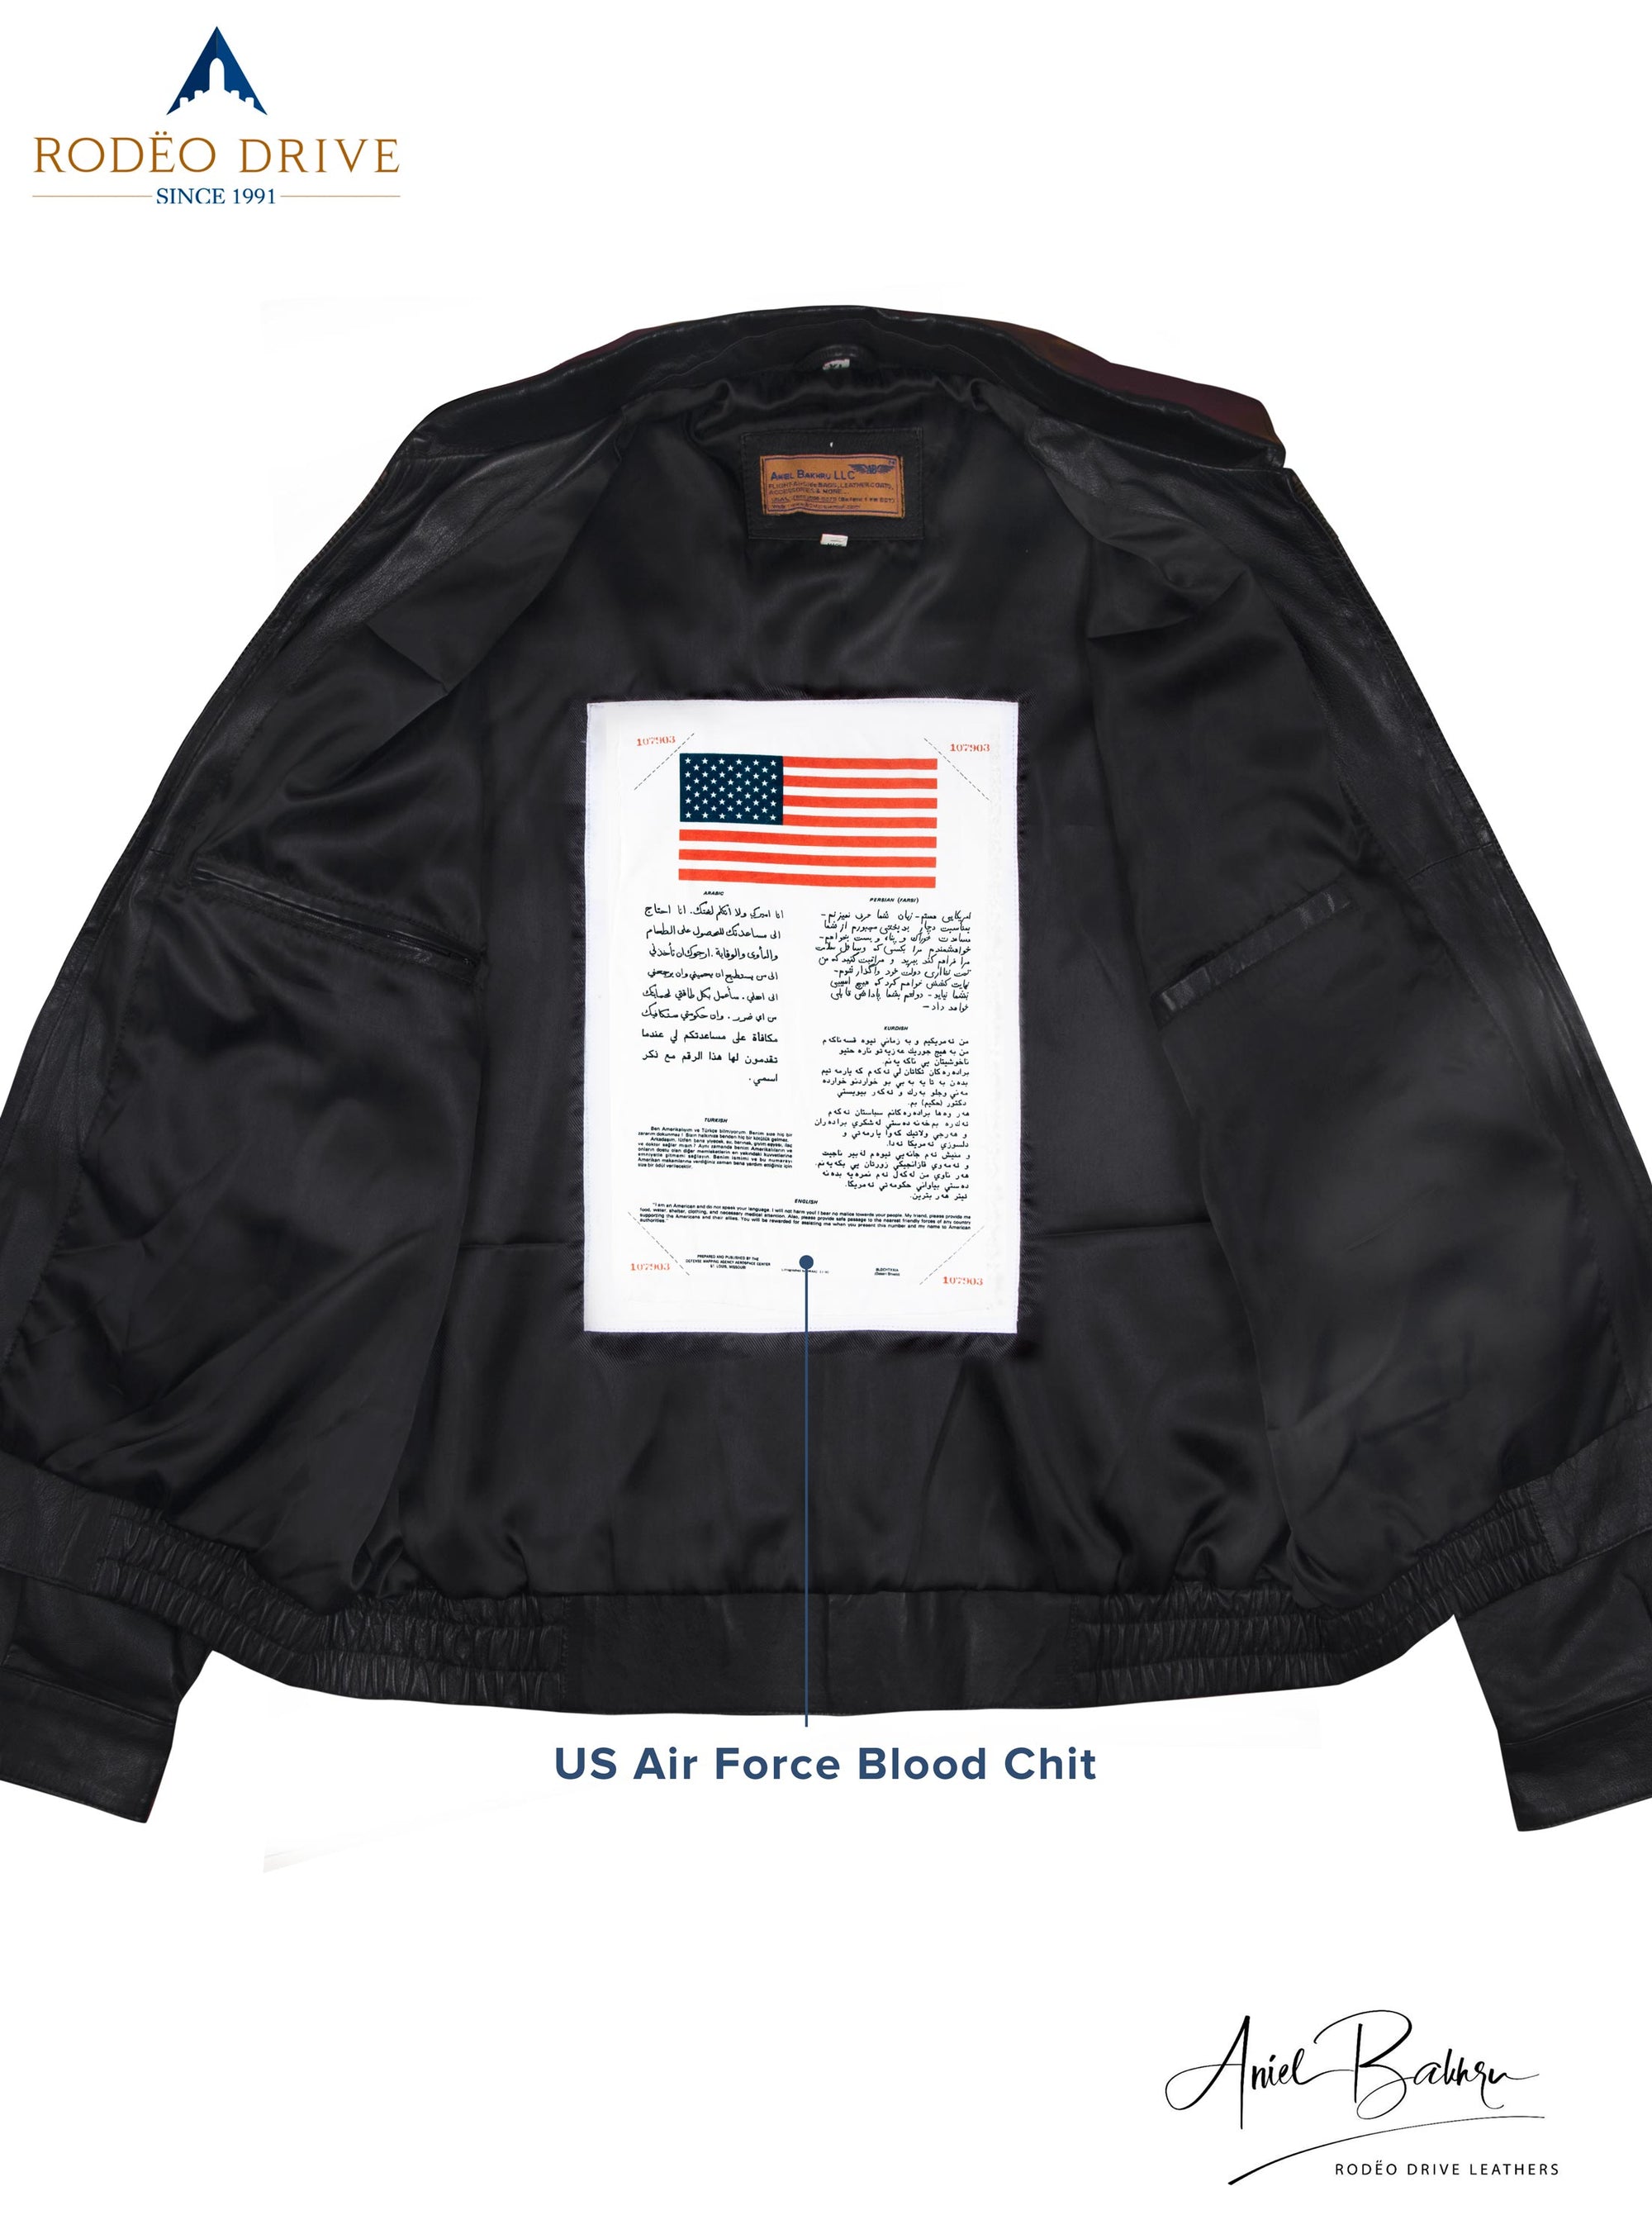 inside image of Bomber jacket. US Air Force Blood Chit sewed inside it. is sewed inside.